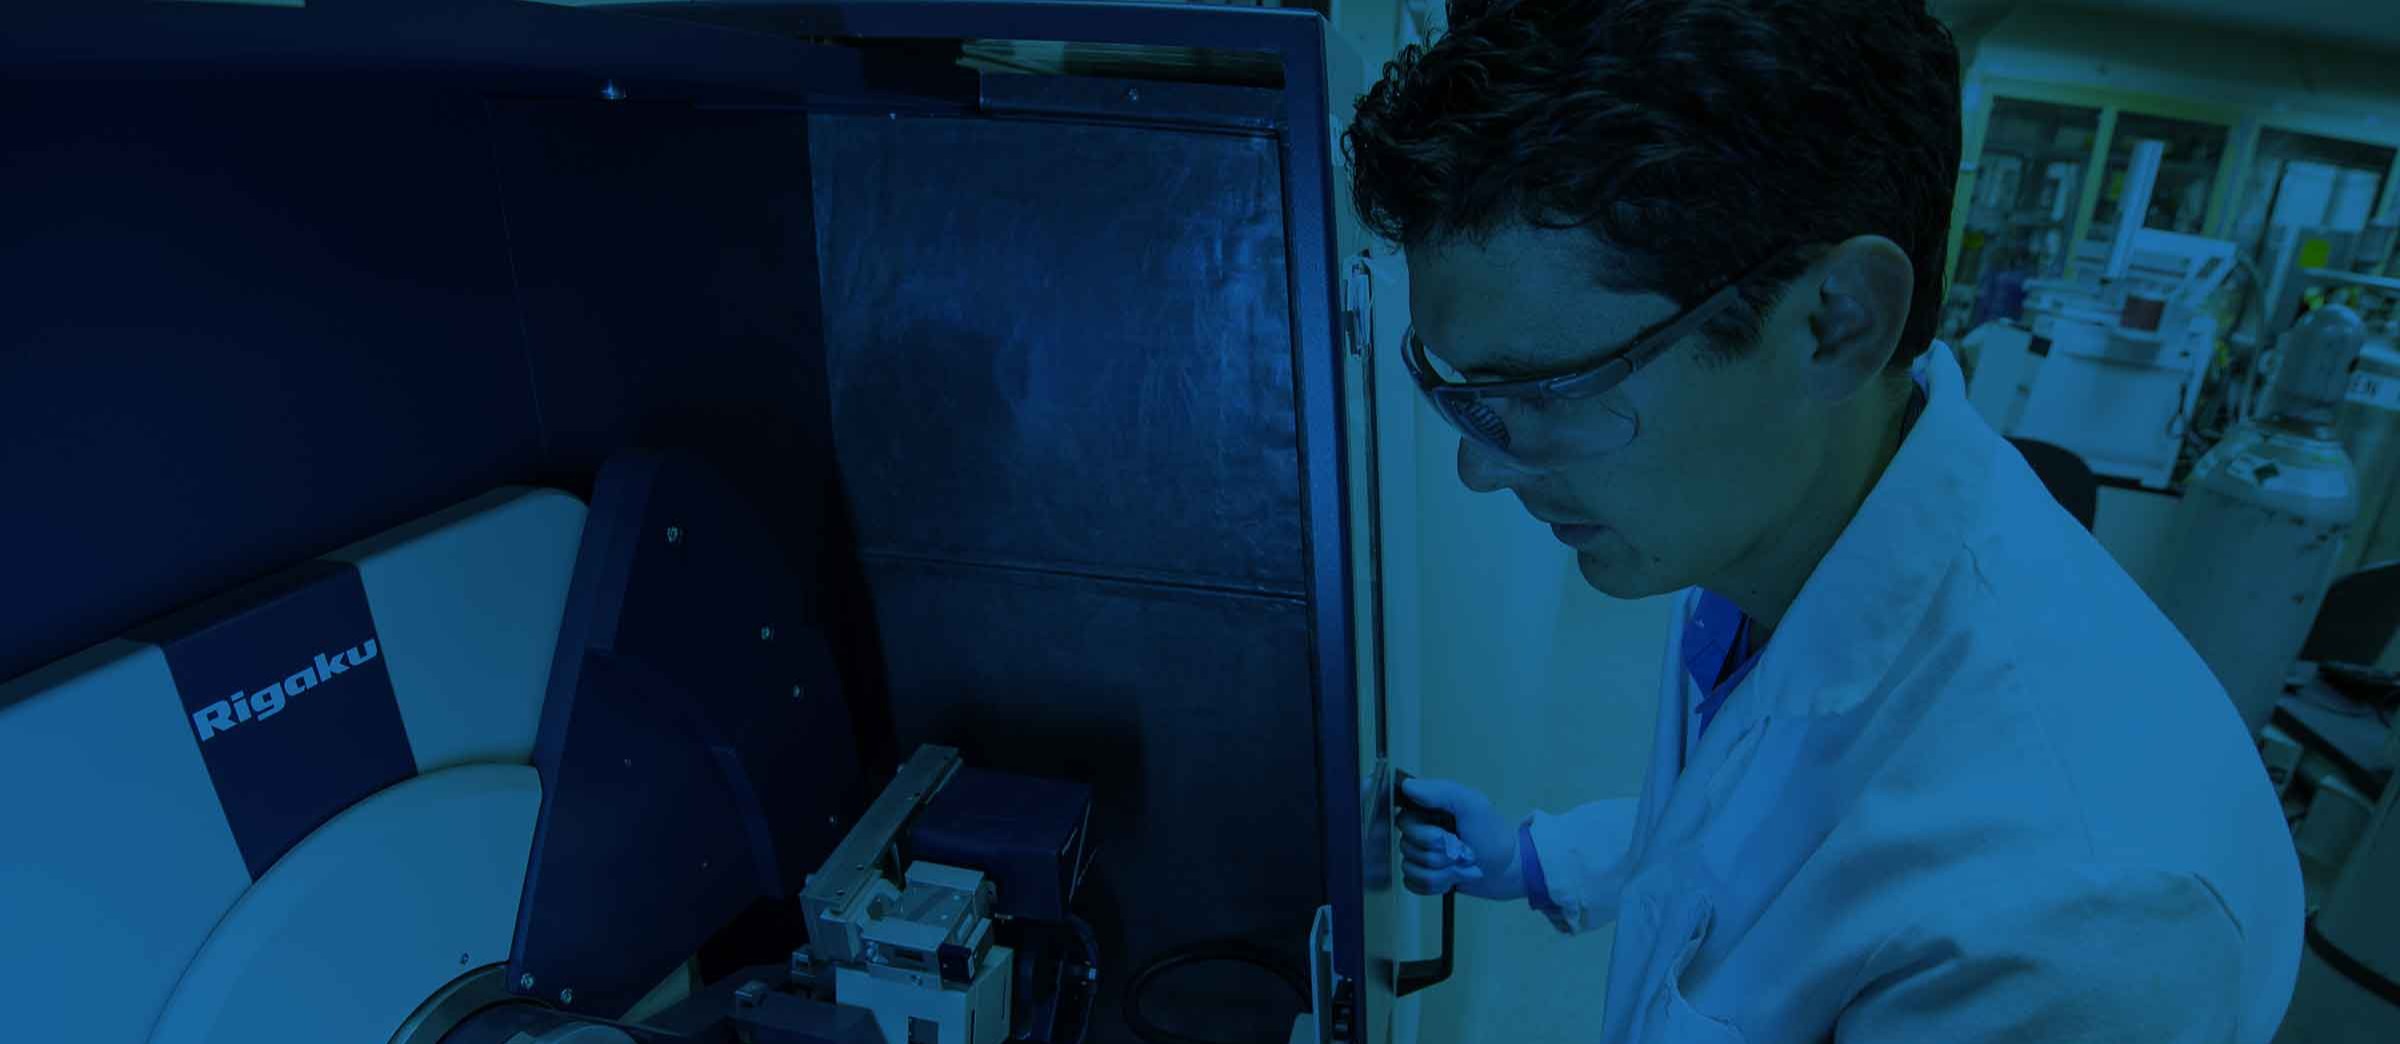 Man in a lab coat, working with equipment